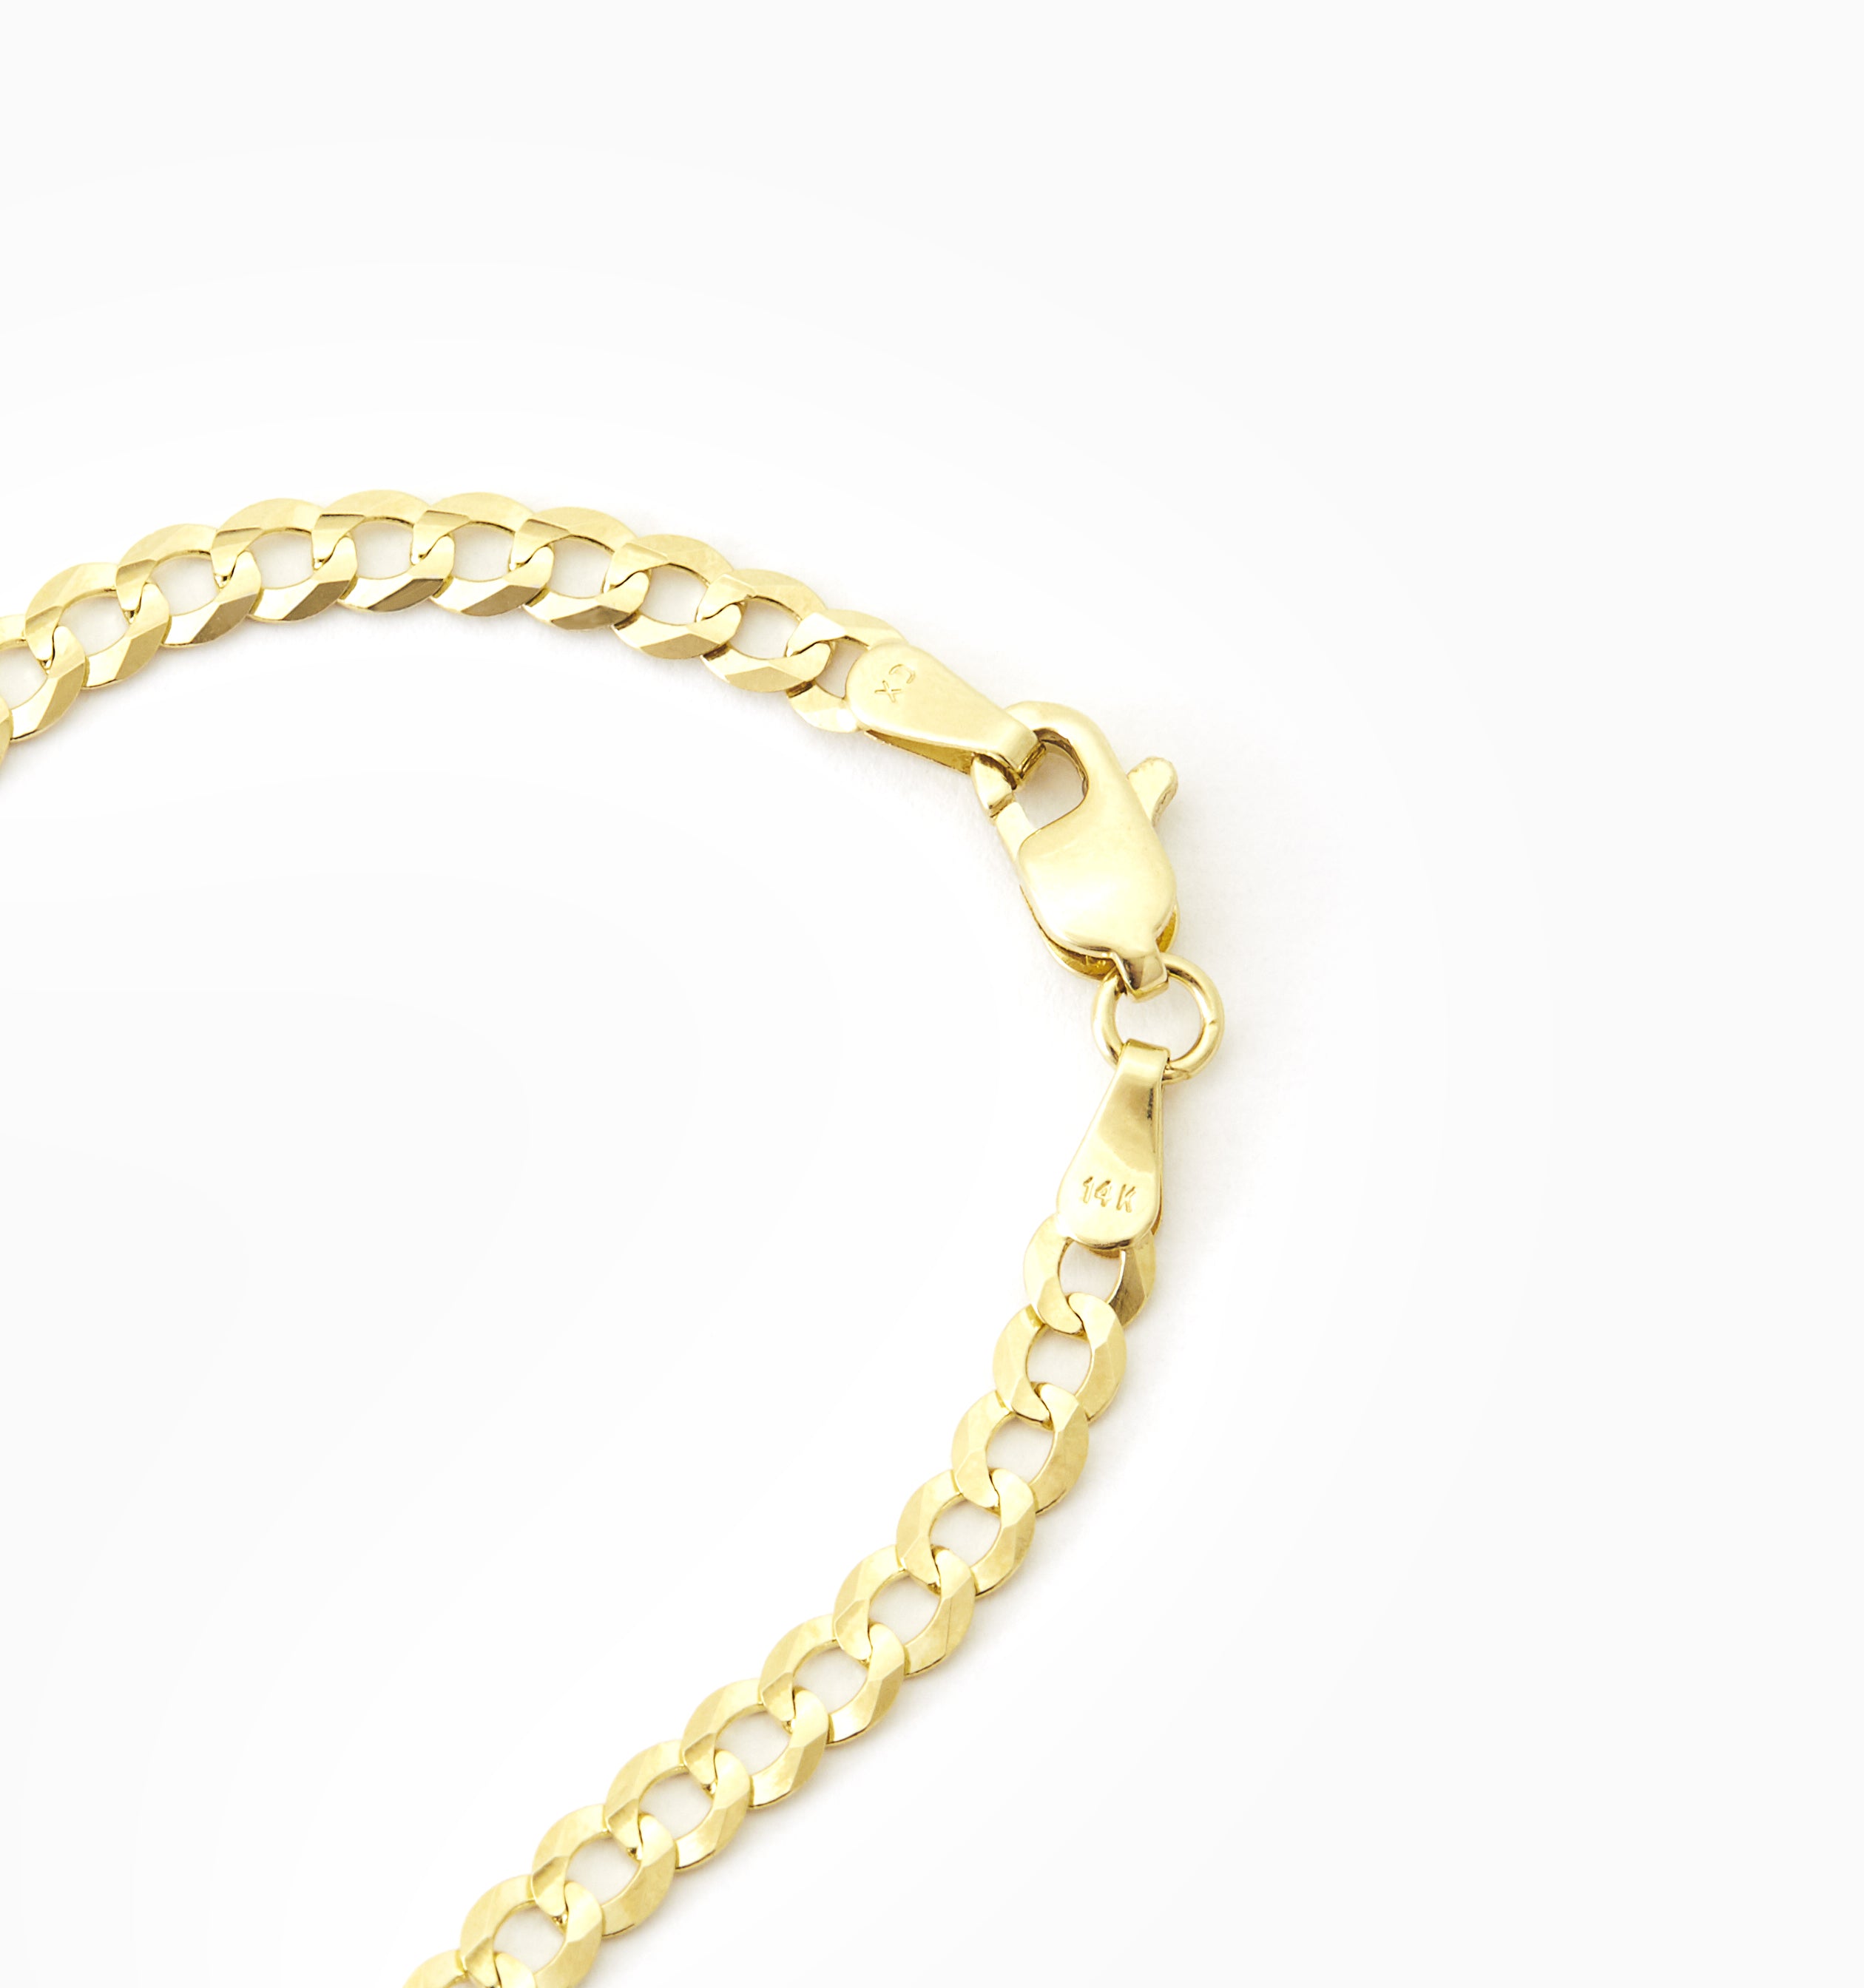 Cuban Chain Necklace In 14K Solid Gold